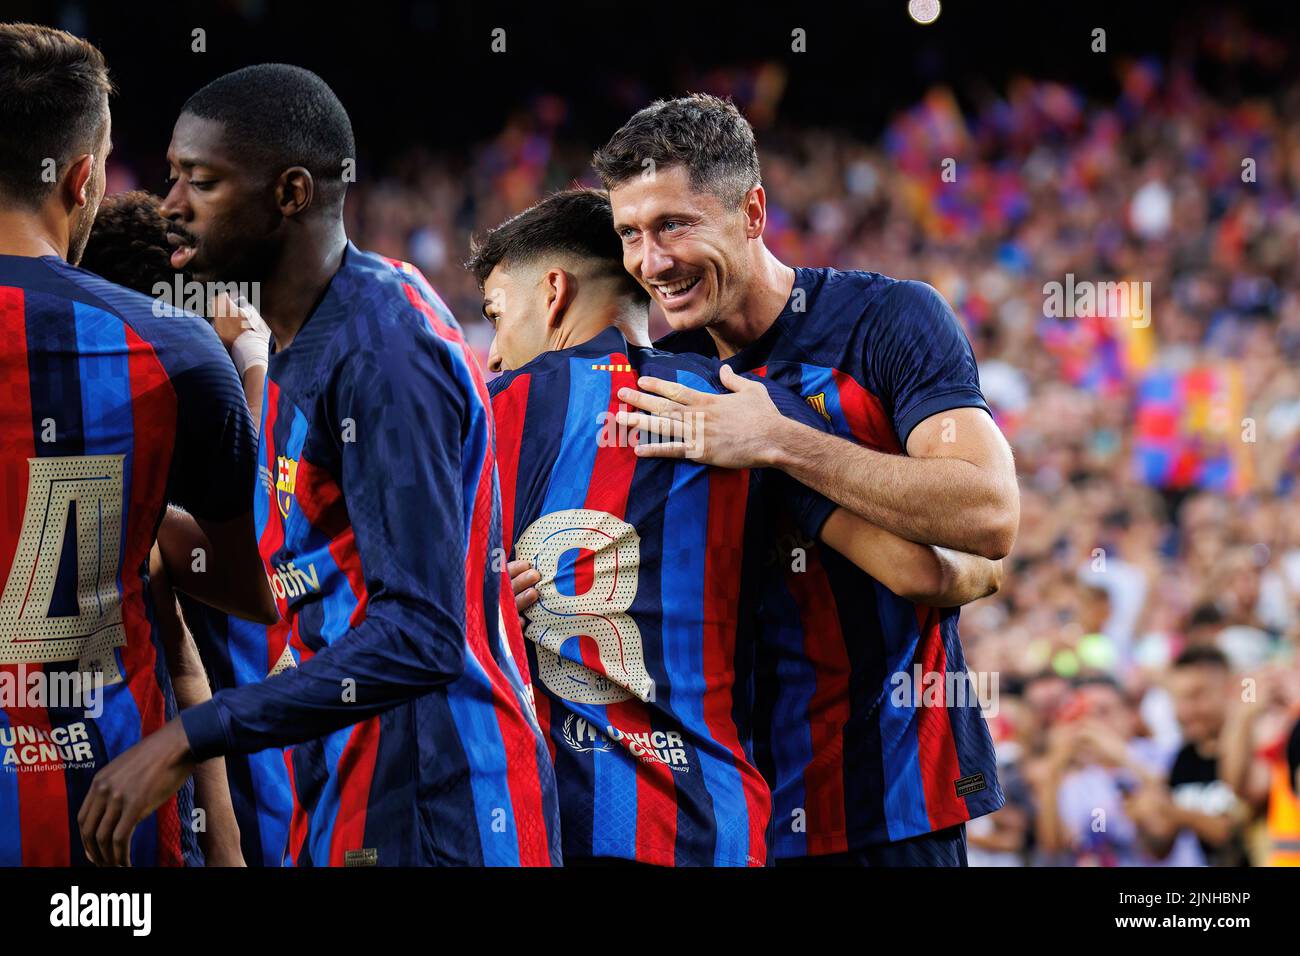 BARCELONA - AUG 7: Lewandowski celebrates after scoring a goal during the Joan Gamper Throphy match between FC Barcelona and Pumas at the Camp Nou Sta Stock Photo